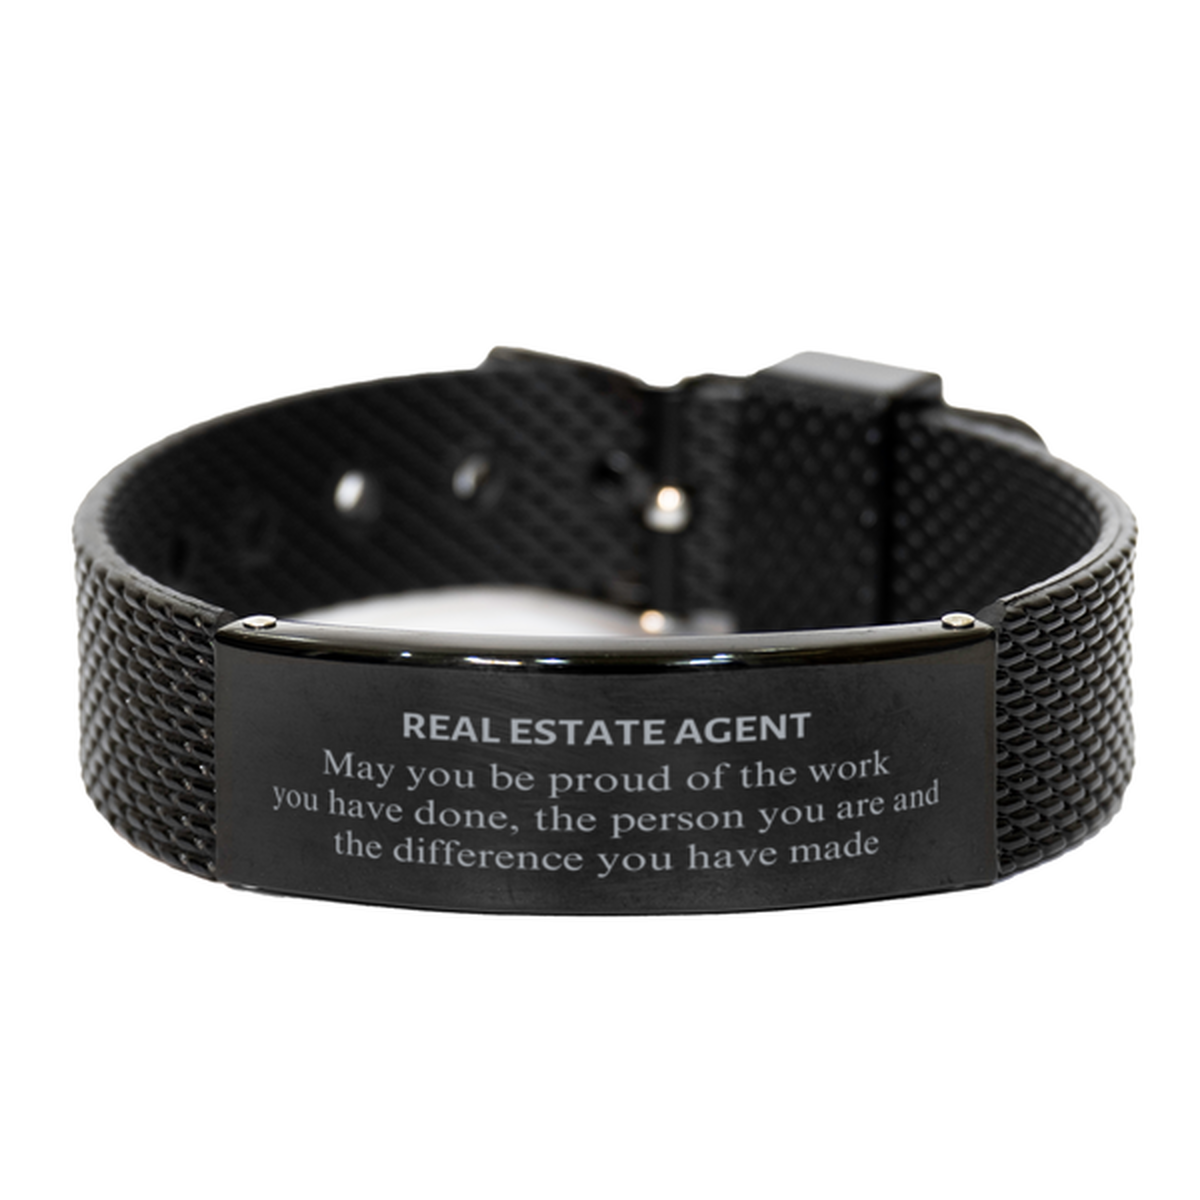 Real Estate Agent May you be proud of the work you have done, Retirement Real Estate Agent Black Shark Mesh Bracelet for Colleague Appreciation Gifts Amazing for Real Estate Agent